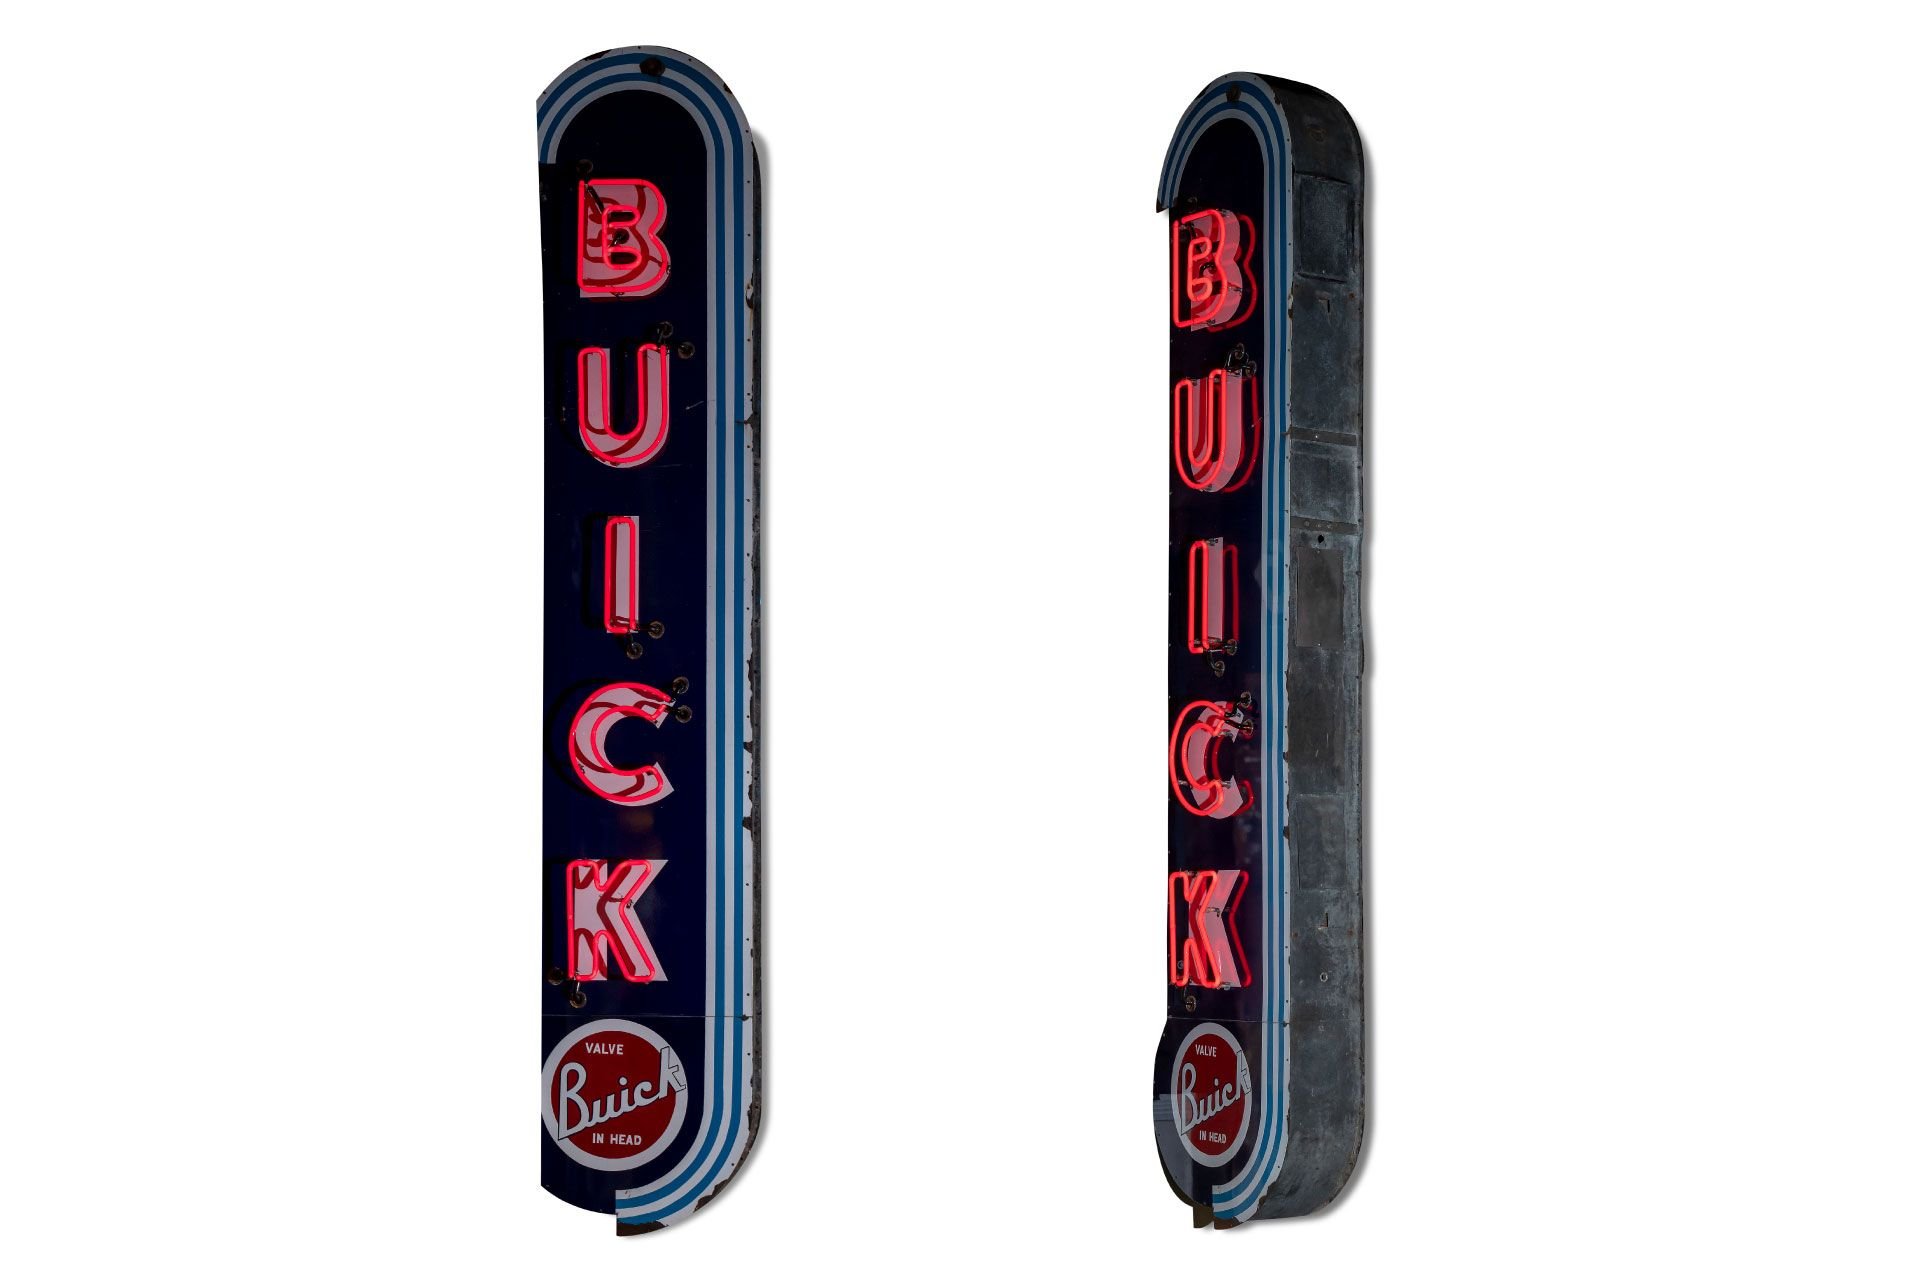 For Sale Very Large 'Buick Dealership' Porcelain Neon Sign, Double-Sided